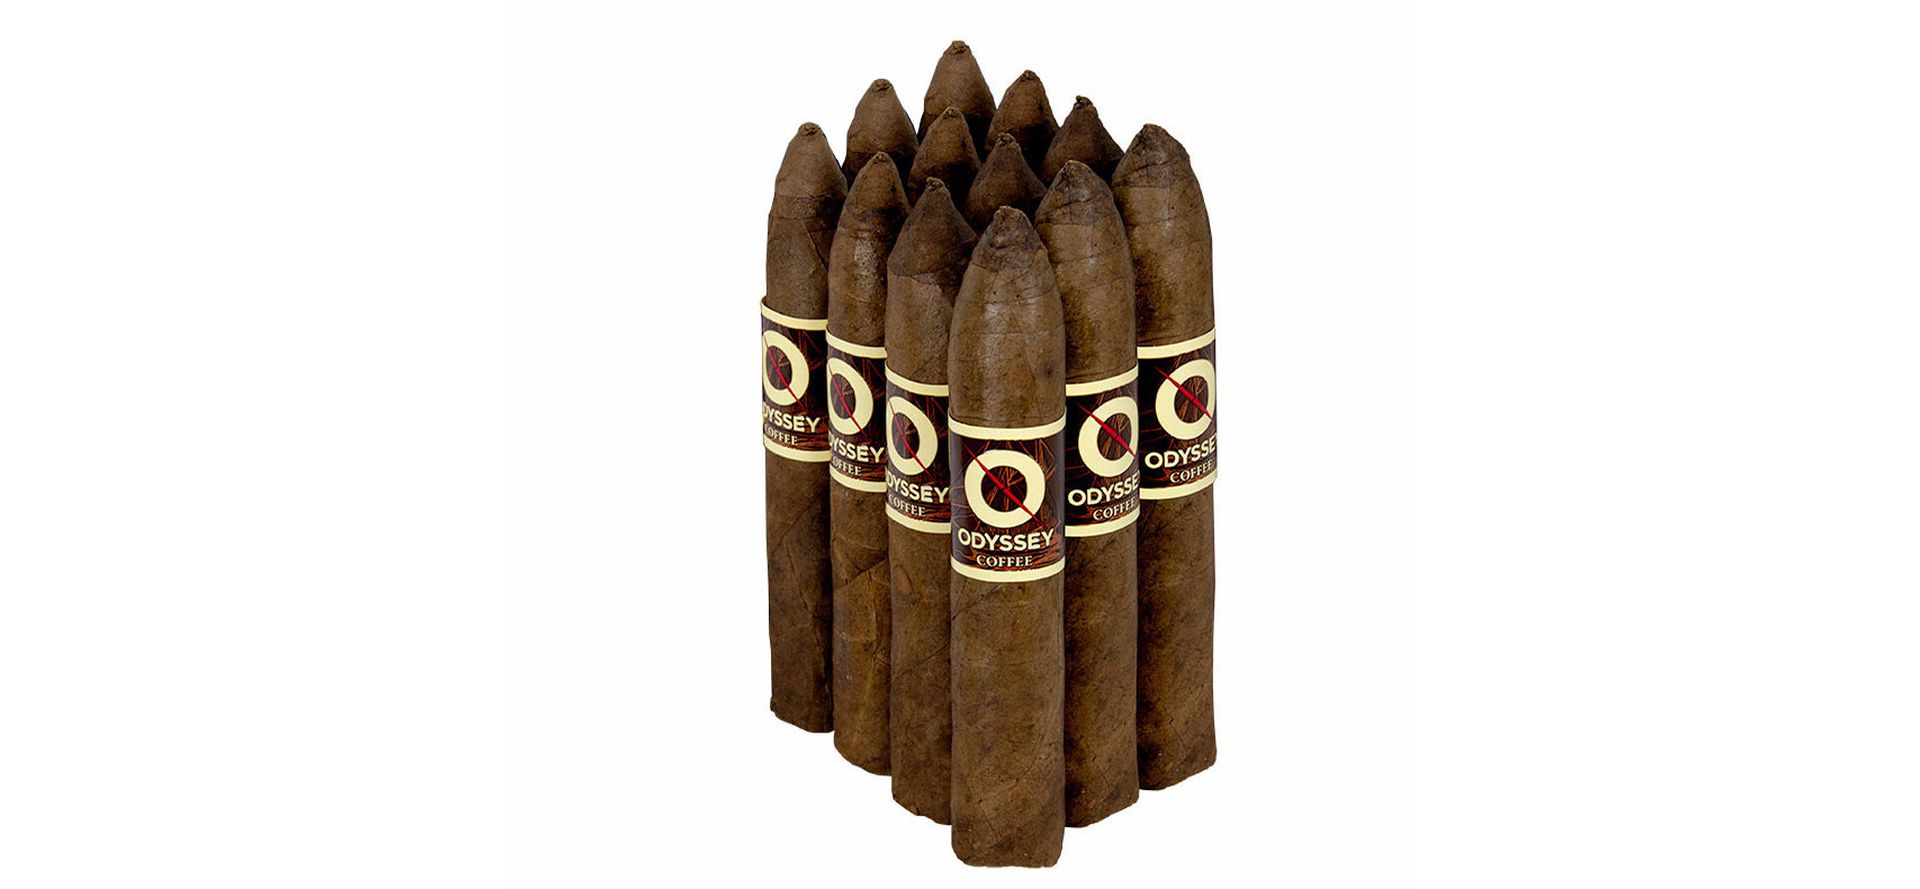 Odyssey Coffee Flavored Cigars.